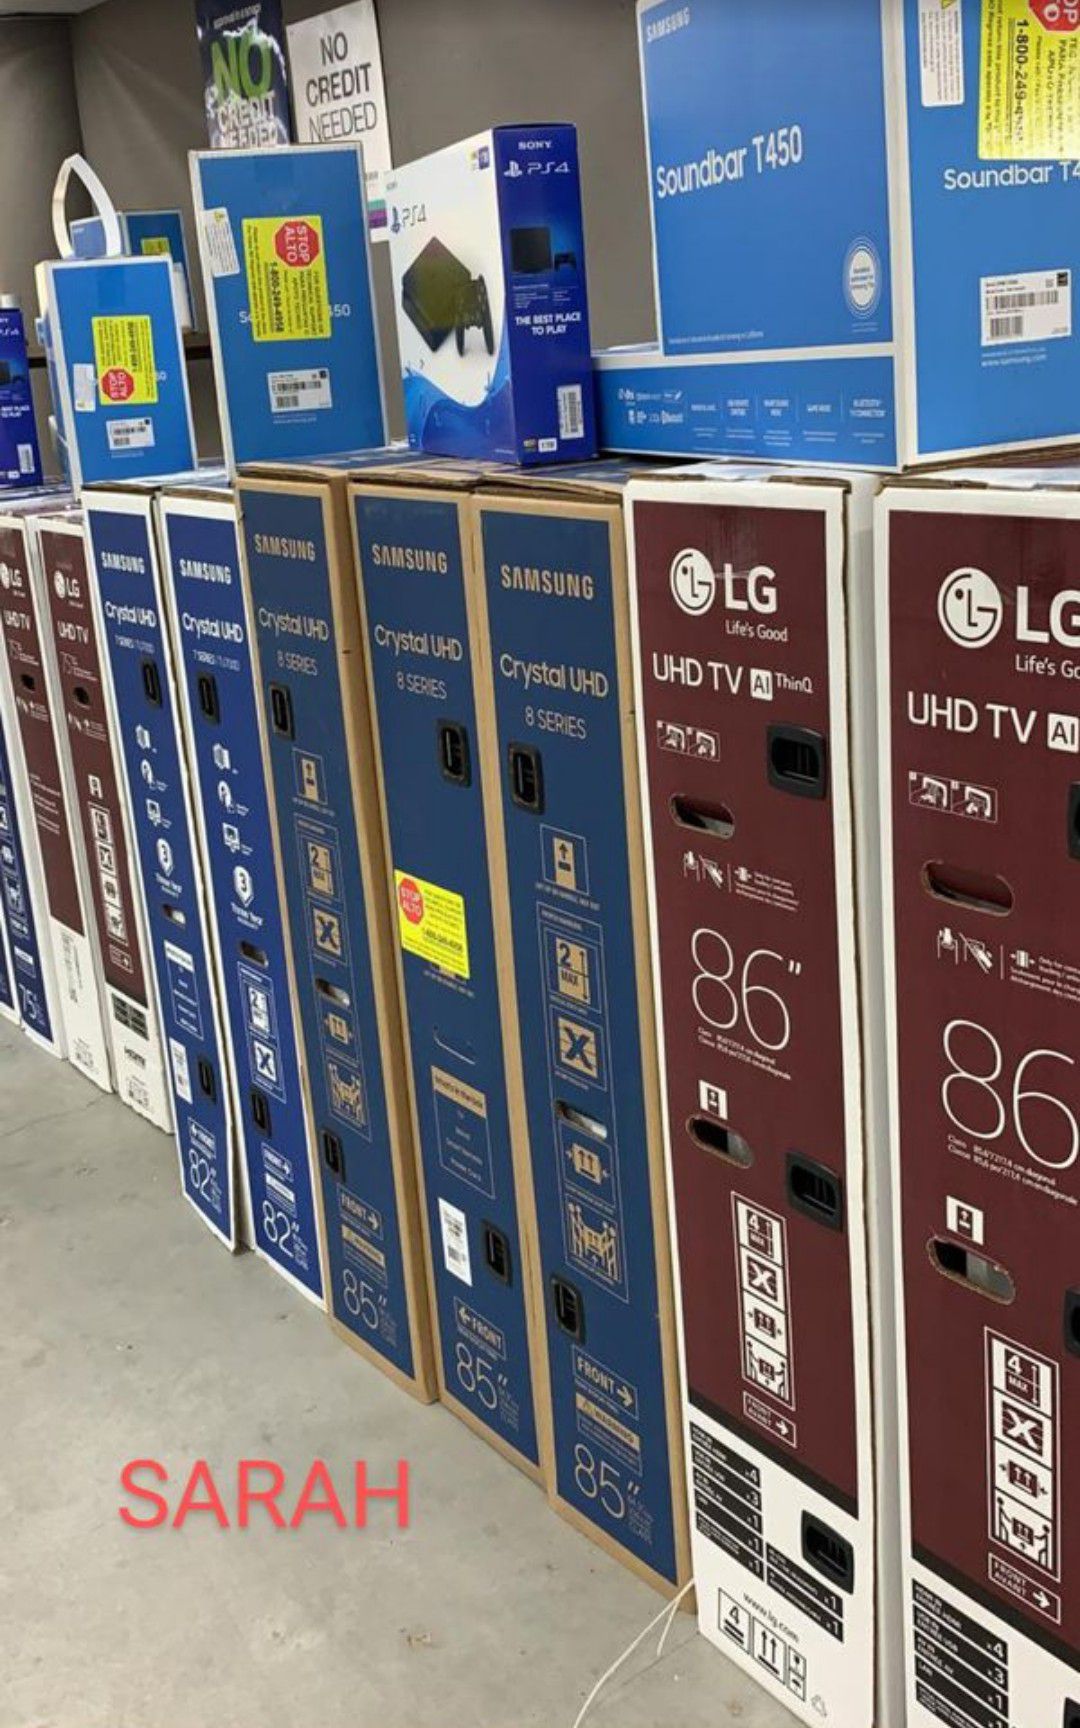 Brand New🧿🧿🧿SAMSUNG & LG UHD SMART TV 65" 70" 75" 86" with FREE XBOX ONE S NO CREDIT NEEDED WITH $39 DOWN PAYMENT!!